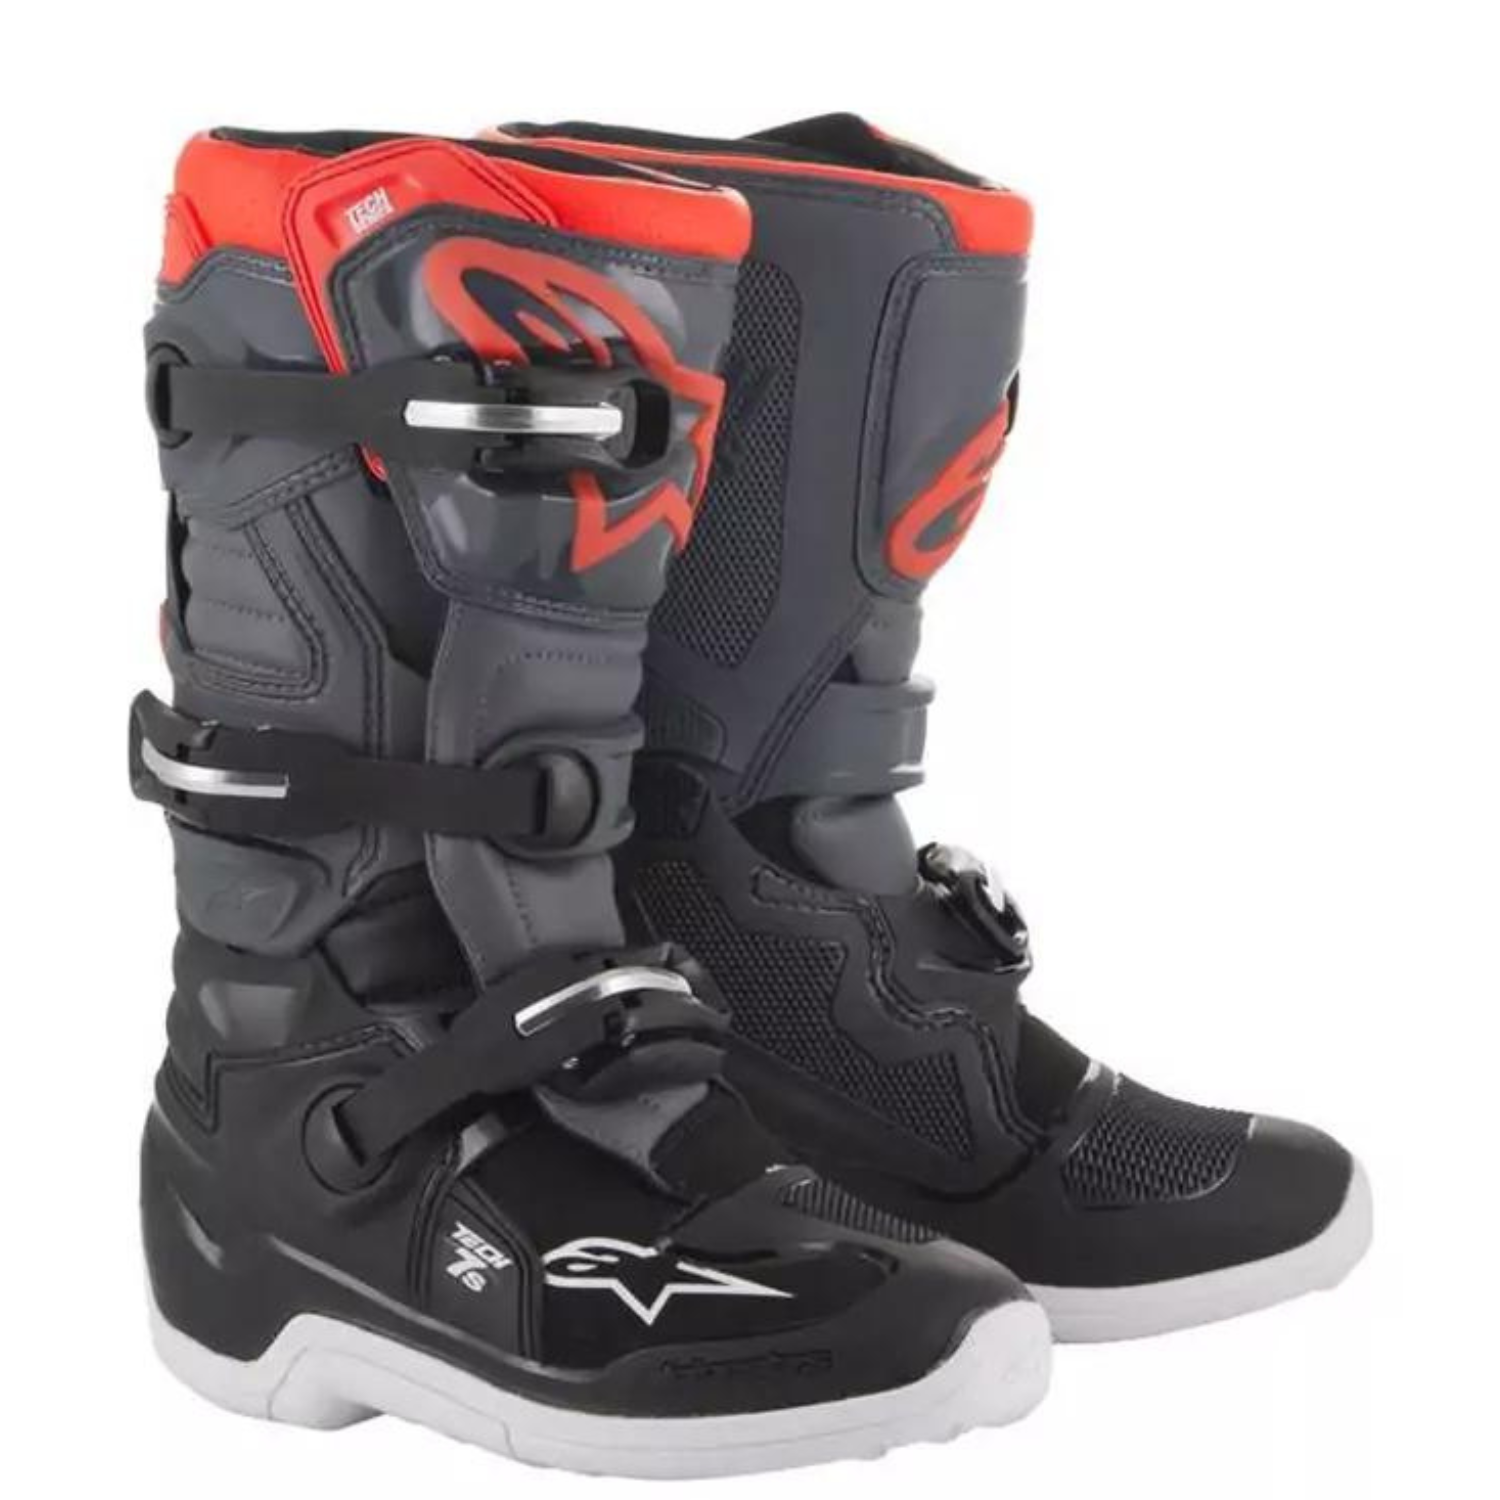 Image of Alpinestars Tech 7 S Black Dark Grey Red Fluo Boots Taille US 5